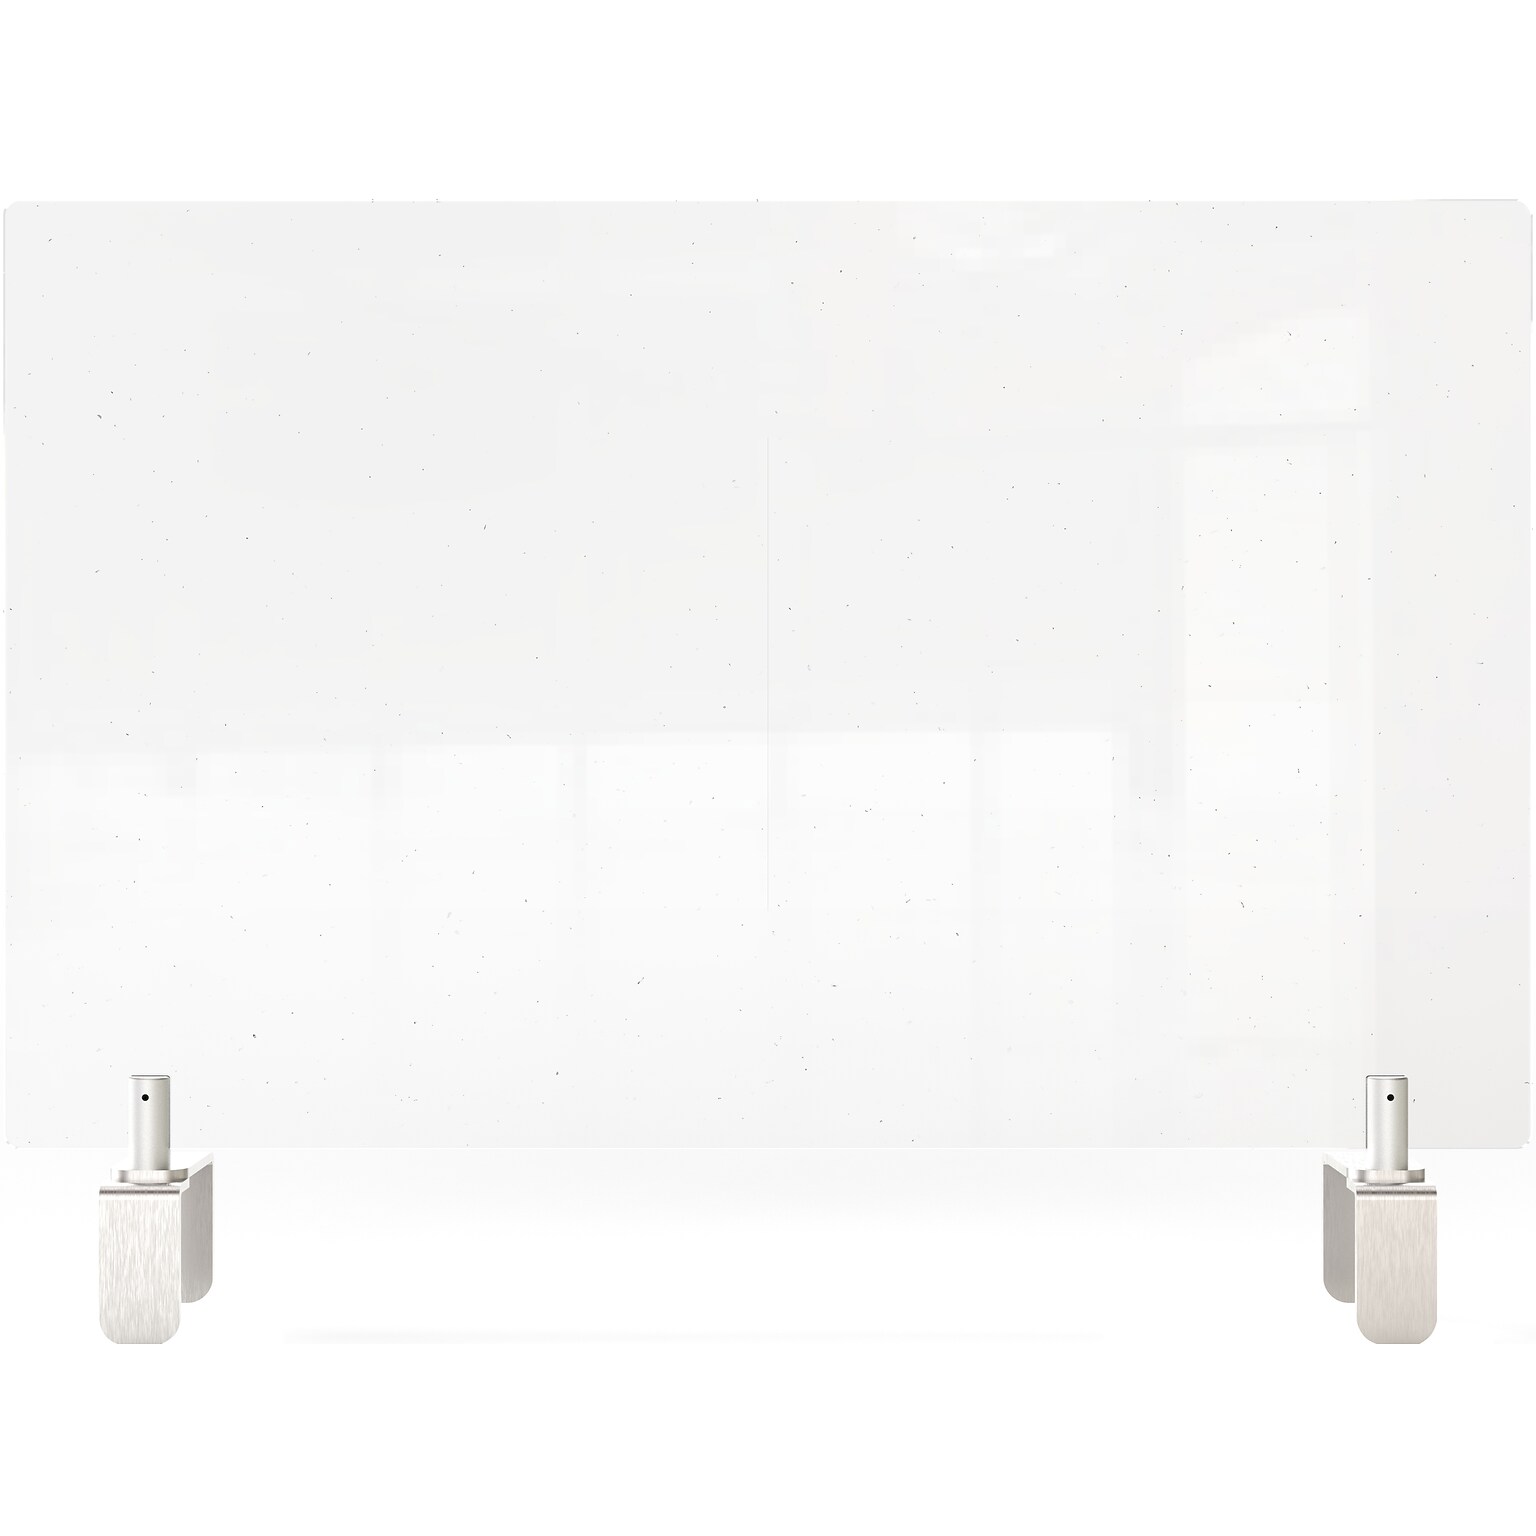 Ghent Clamp 18 x 42 Acrylic Non-tackable Panel Extender, Clear (PEC1842-A)